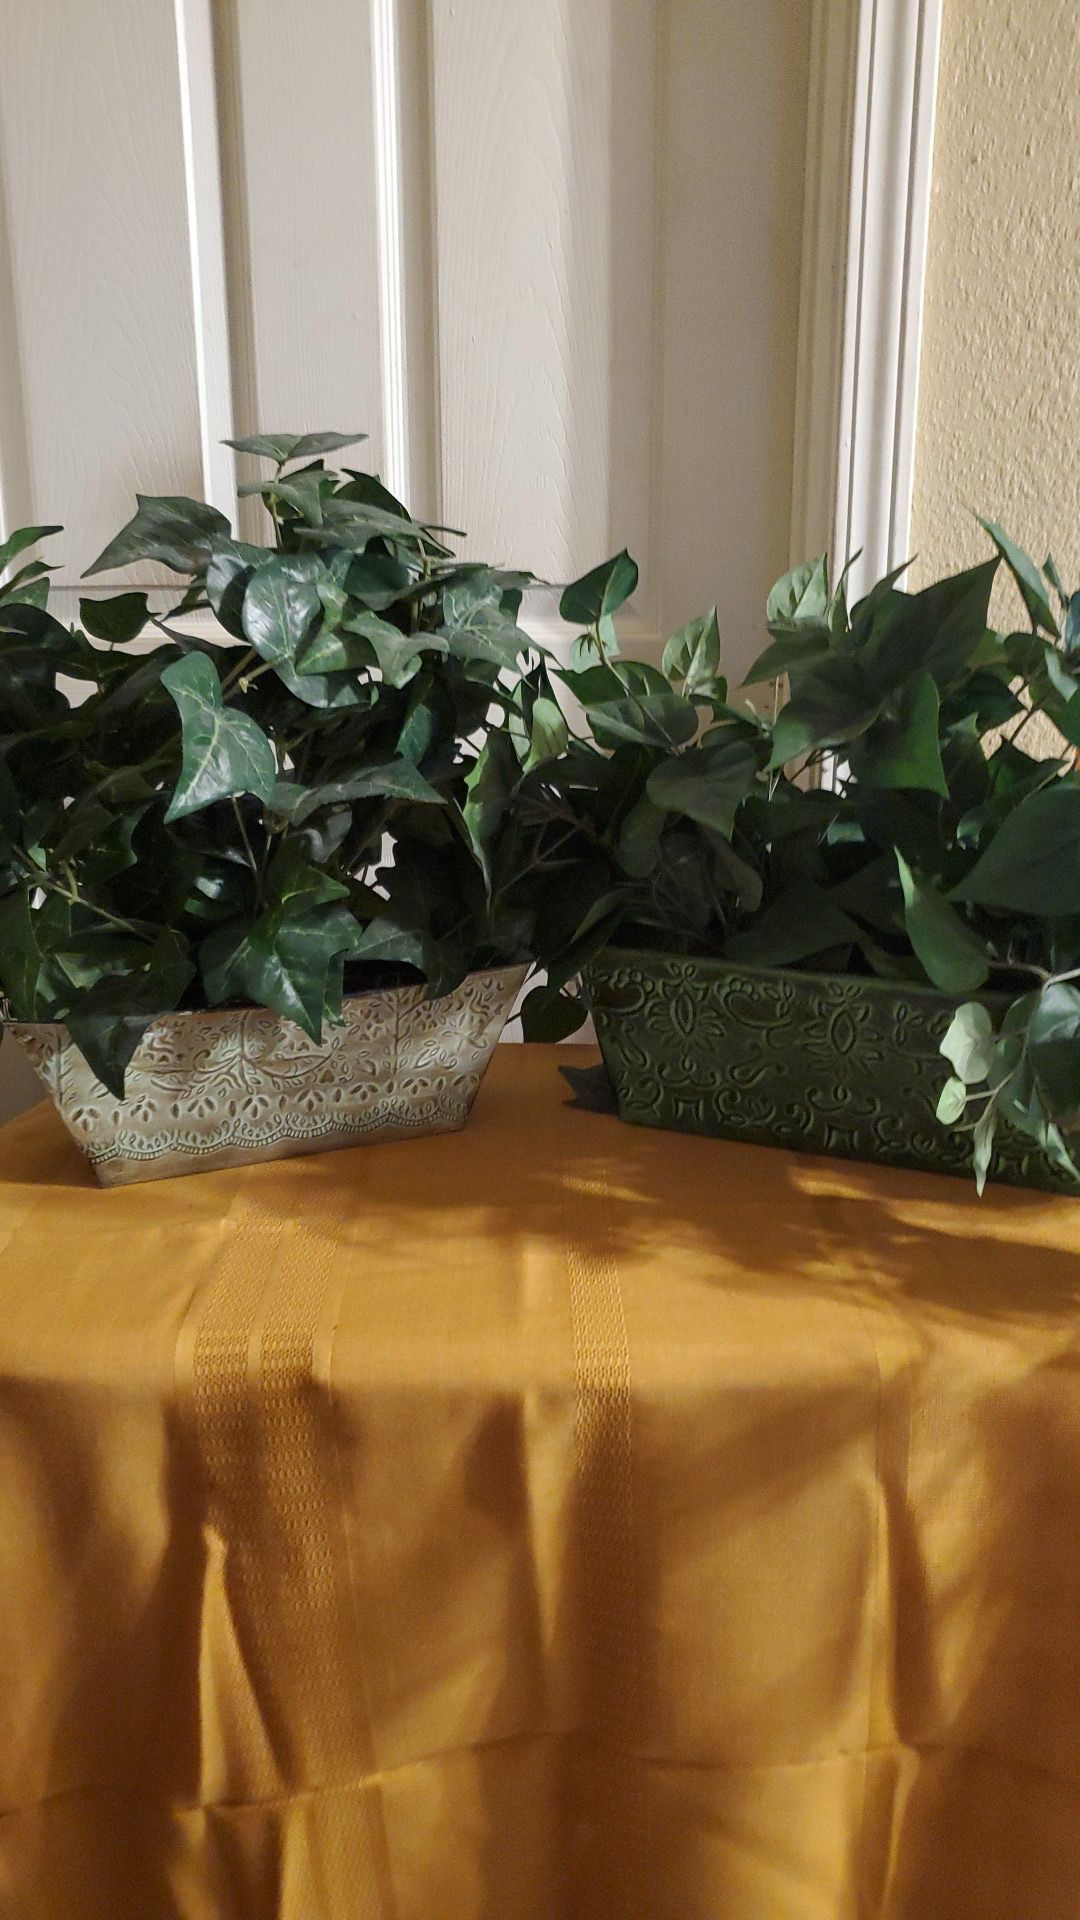 Two "Evergreen" Plants (Fake)